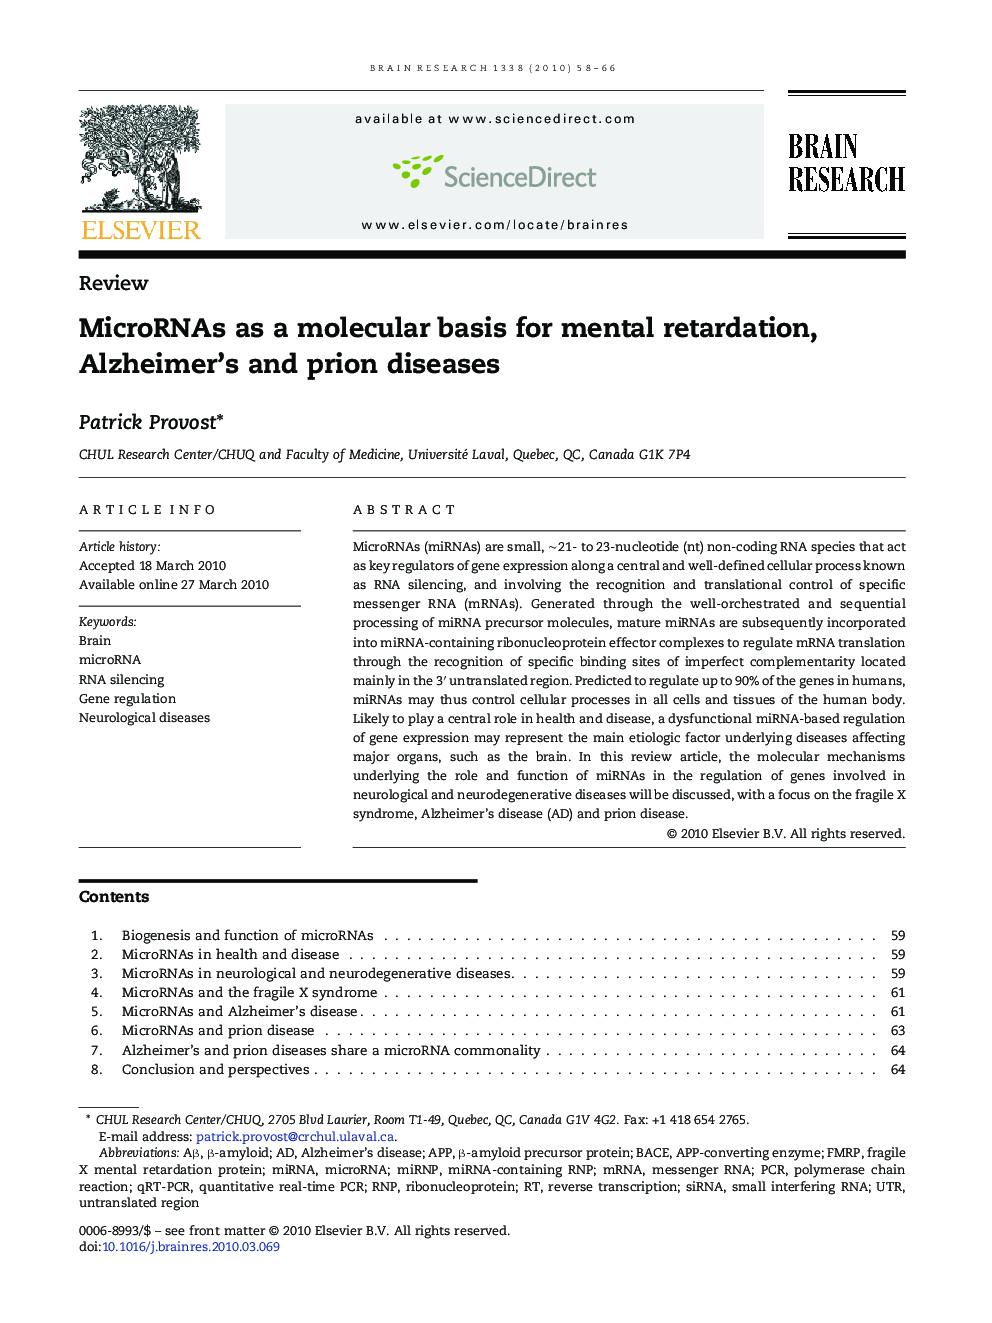 MicroRNAs as a molecular basis for mental retardation, Alzheimer's and prion diseases